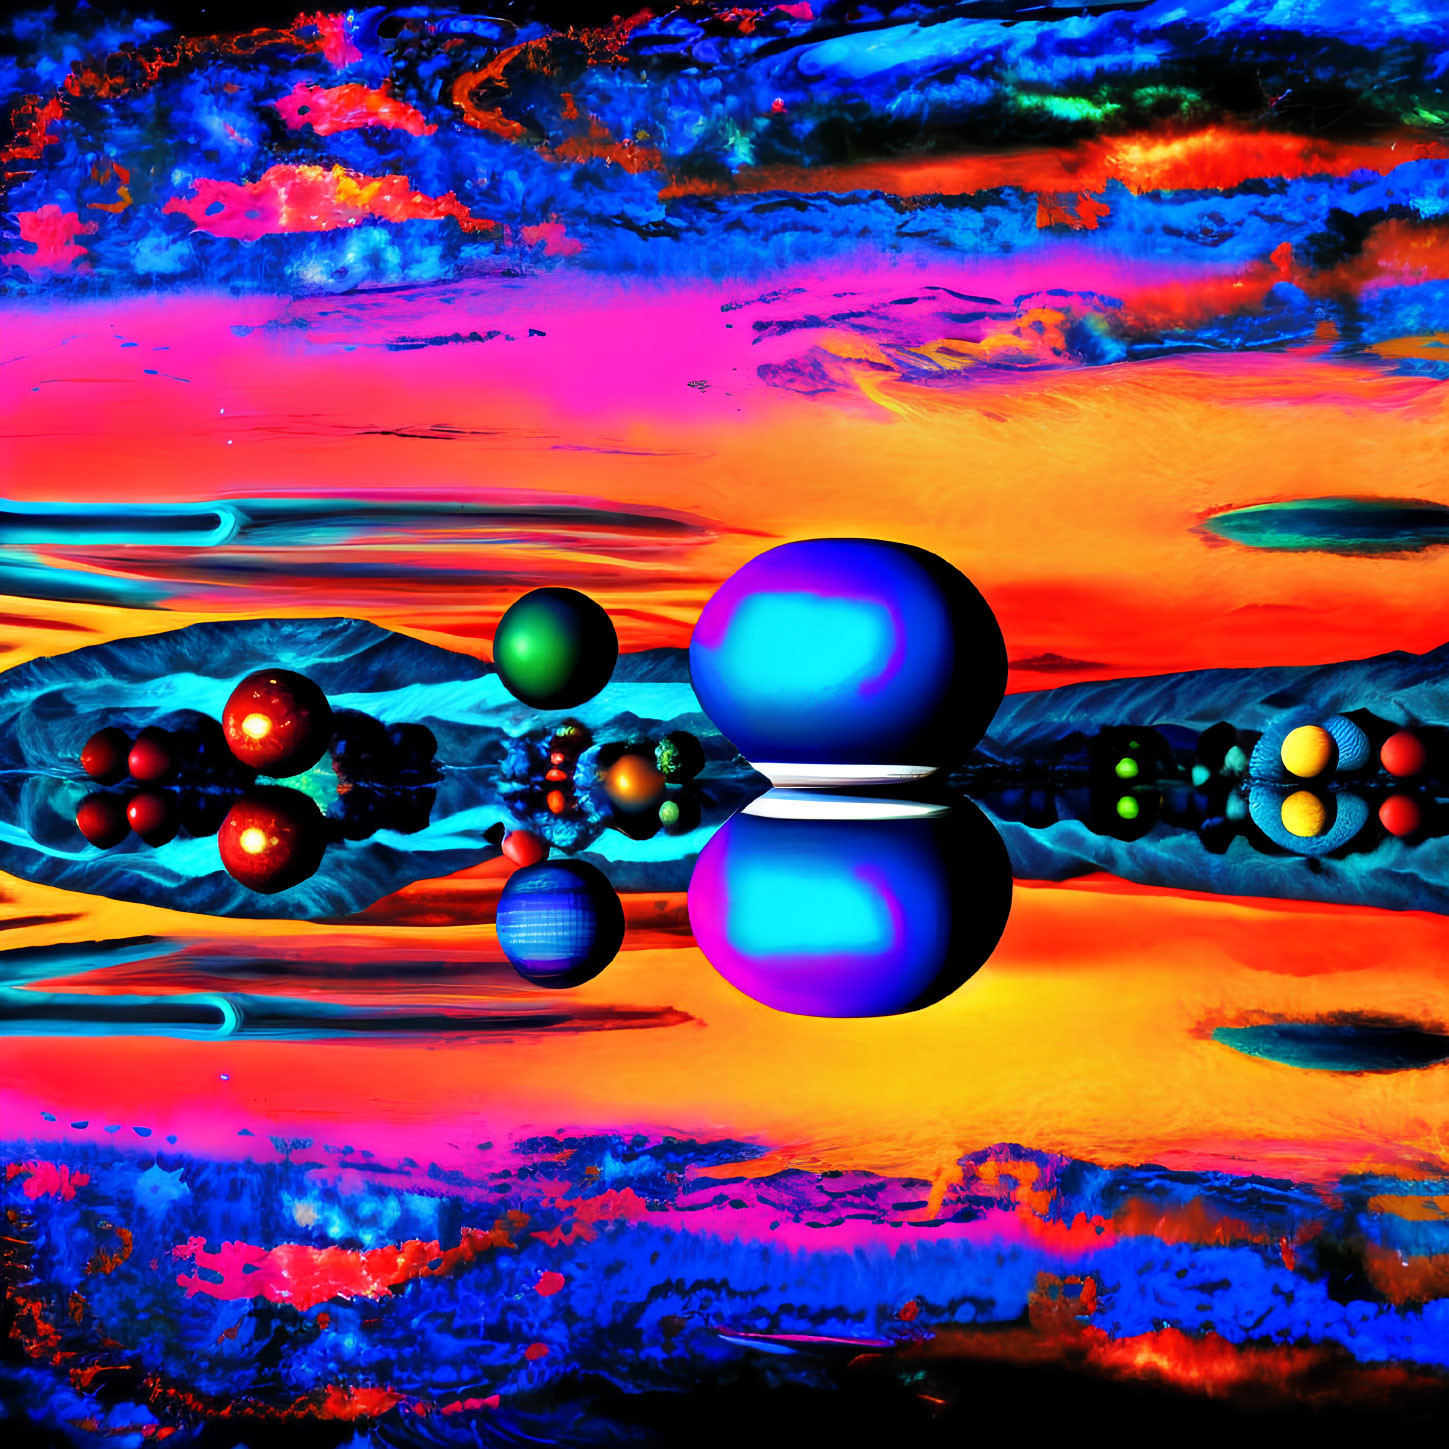 Vibrant spheres over fiery, colorful digital landscape